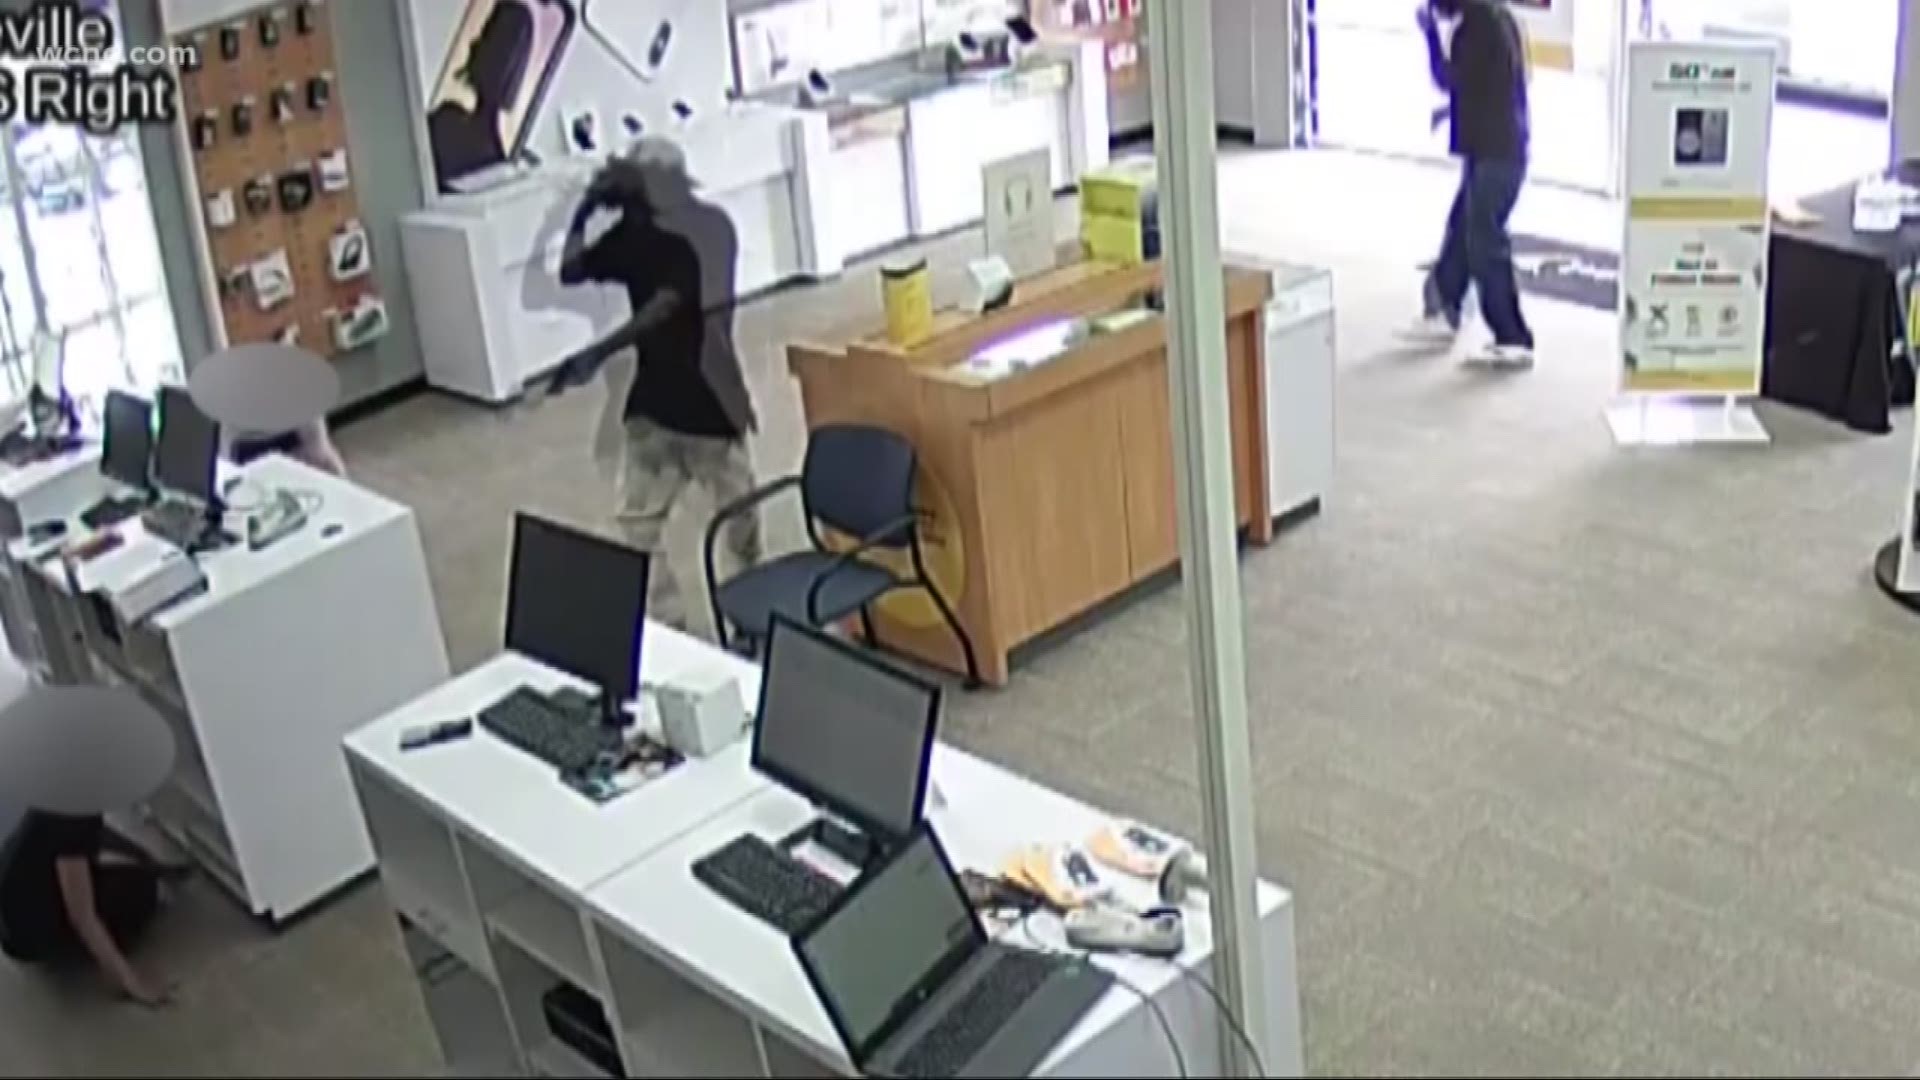 The Pineville Police Department's searching for the suspect's accused of robbing a Sprint store Monday morning.